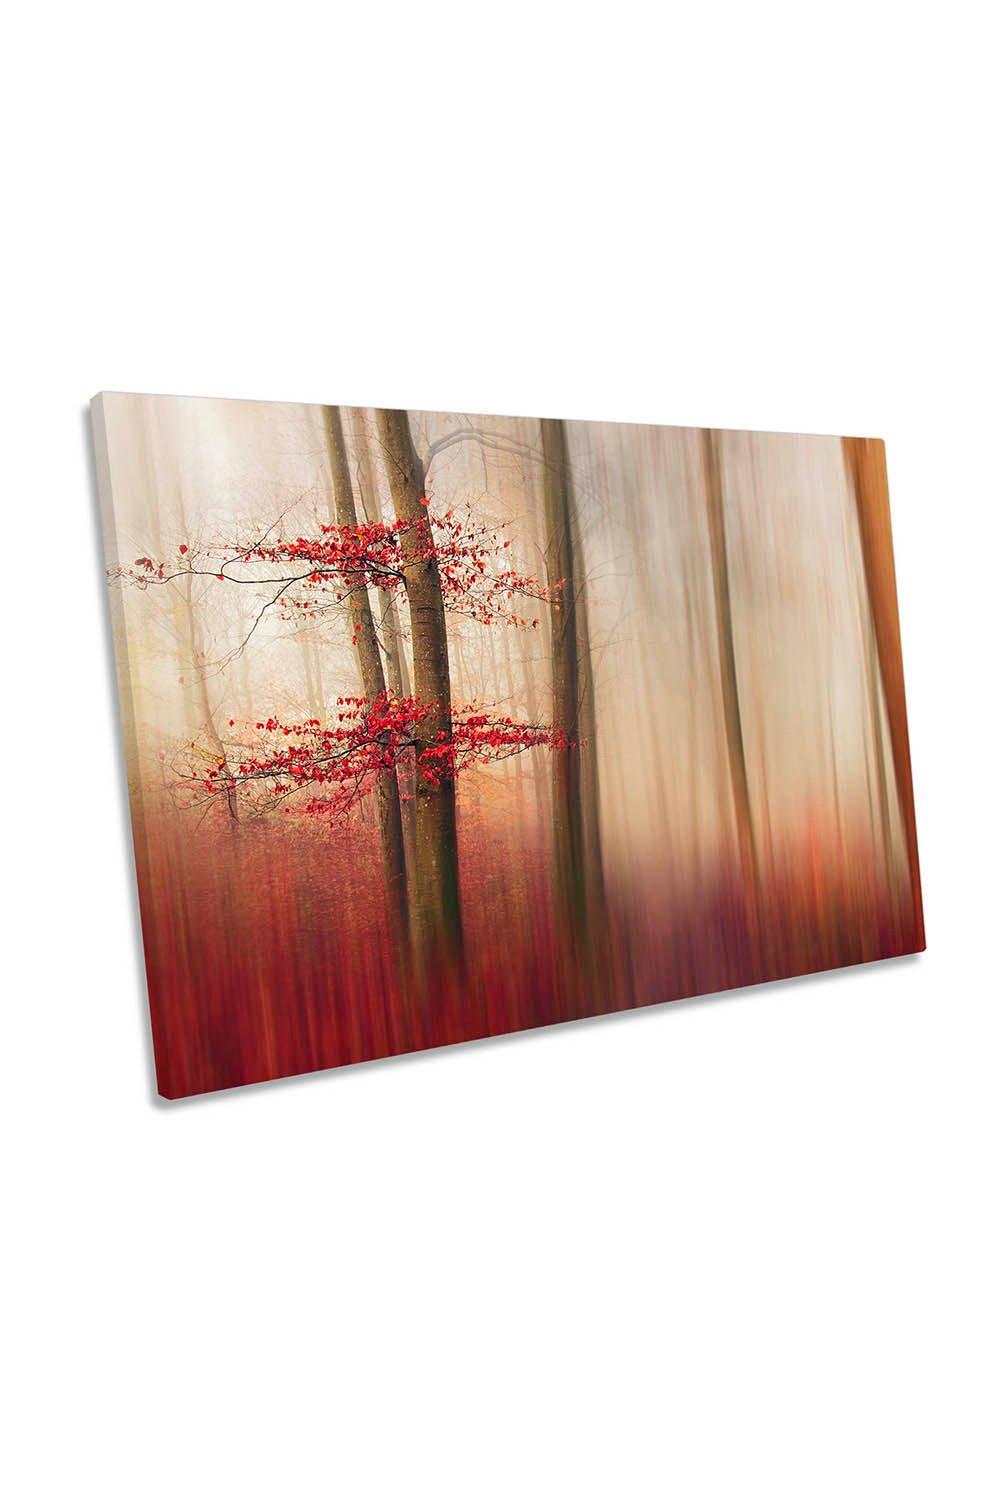 Red Leaves Forest Landscape Autumn Canvas Wall Art Picture Print